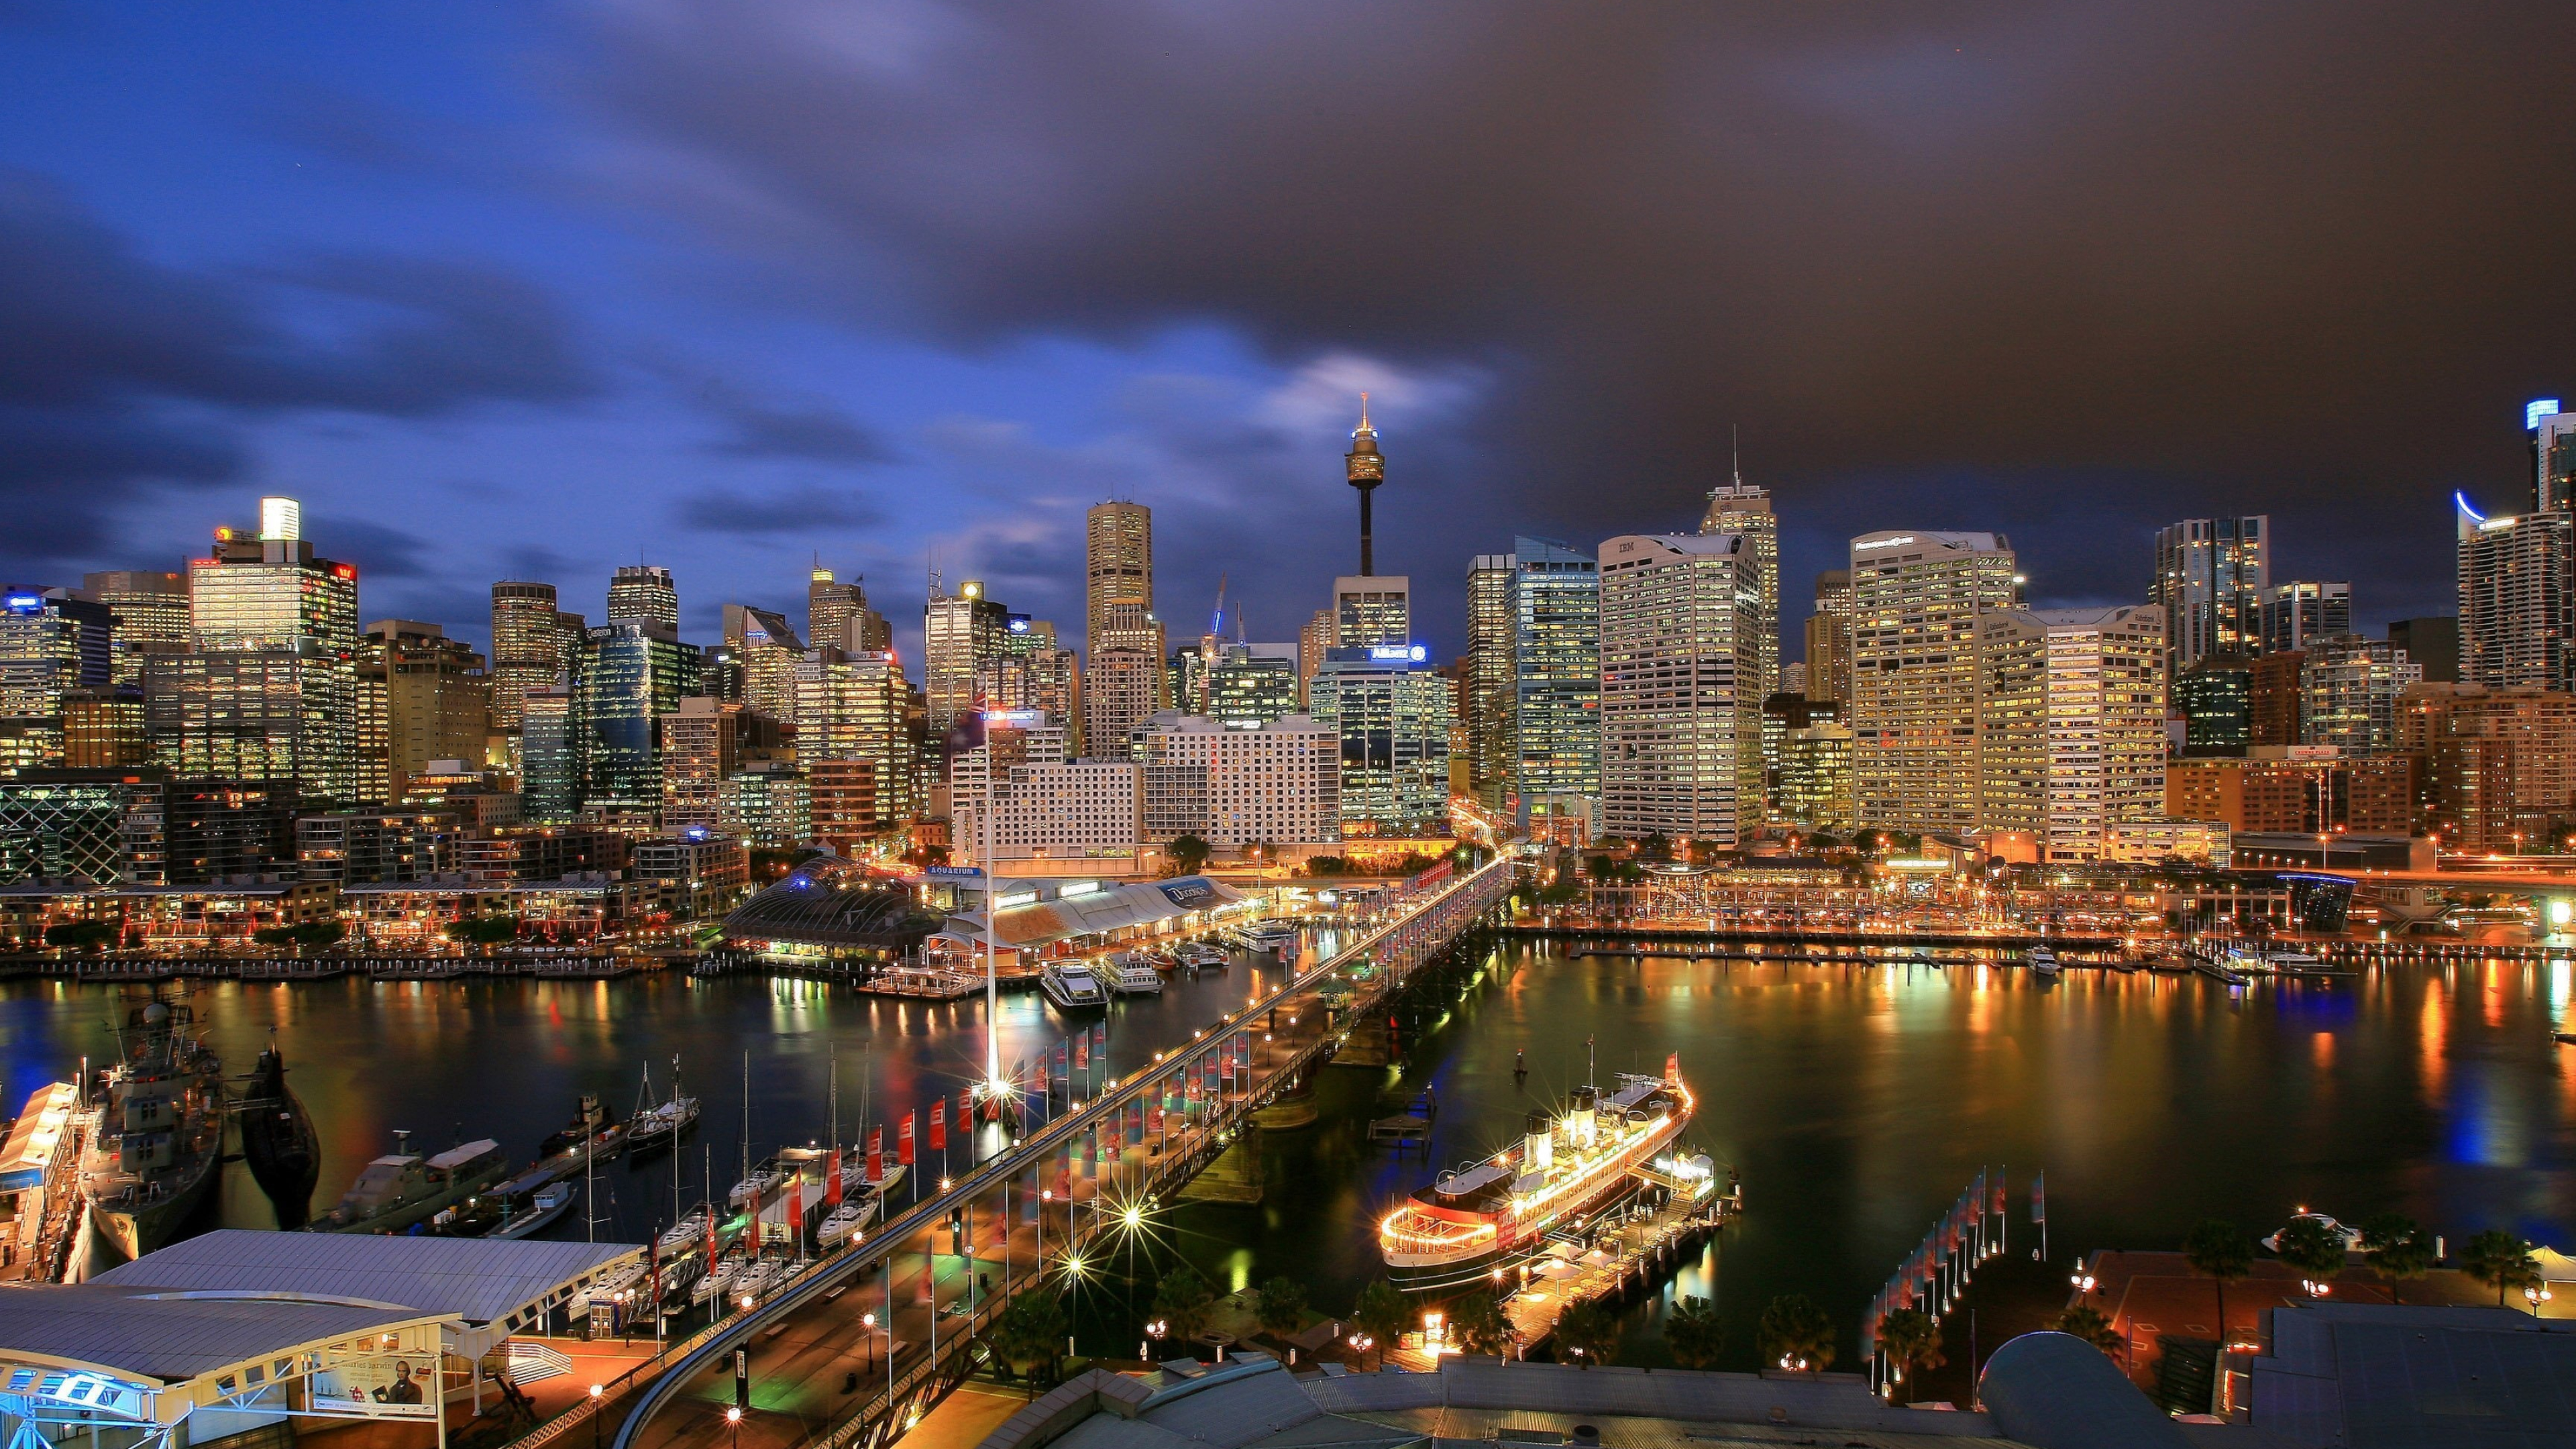 Sydney: Nicknames of the city include the 'Emerald City' and the 'Harbour City'. 3840x2160 4K Wallpaper.